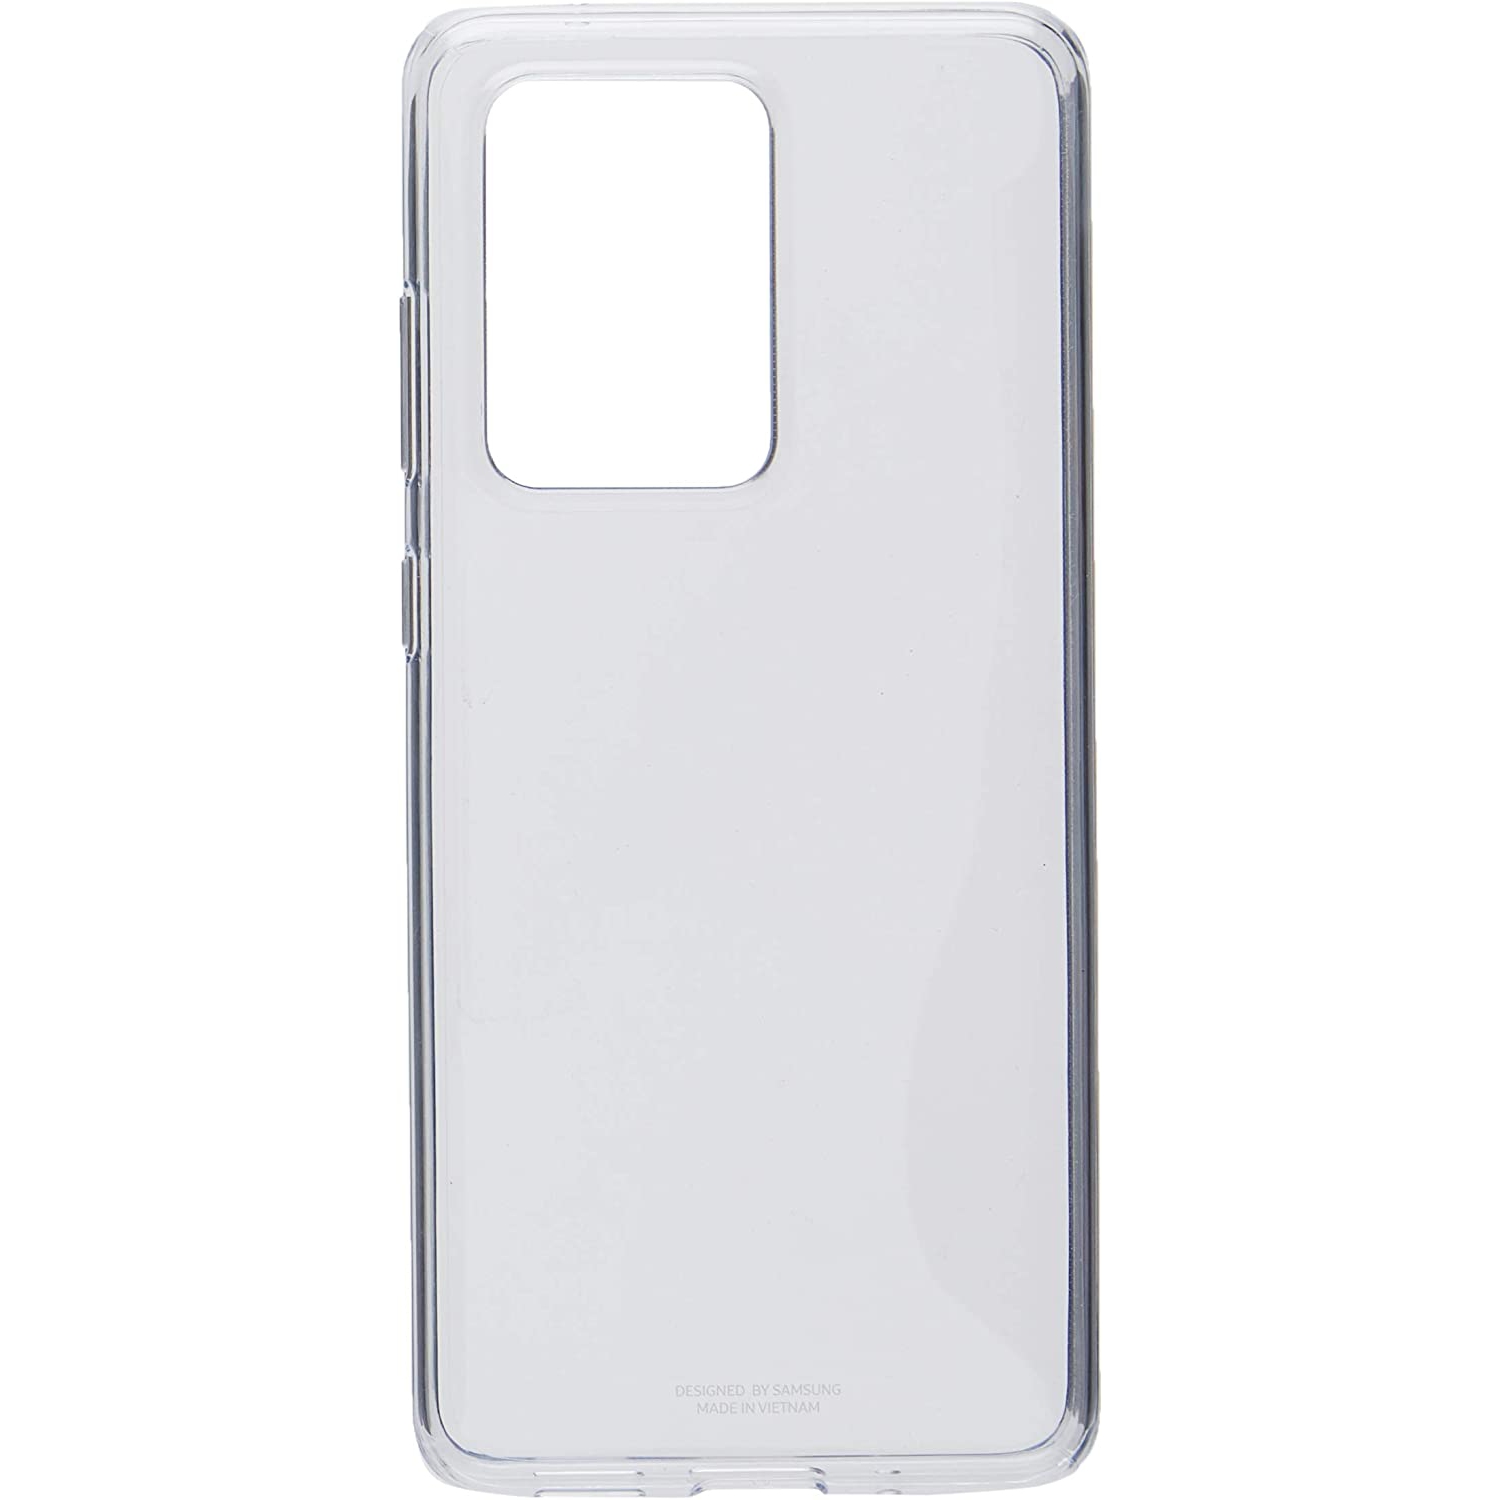 Samsung Galaxy S20 Ultra Clear OEM Clear Cover Case